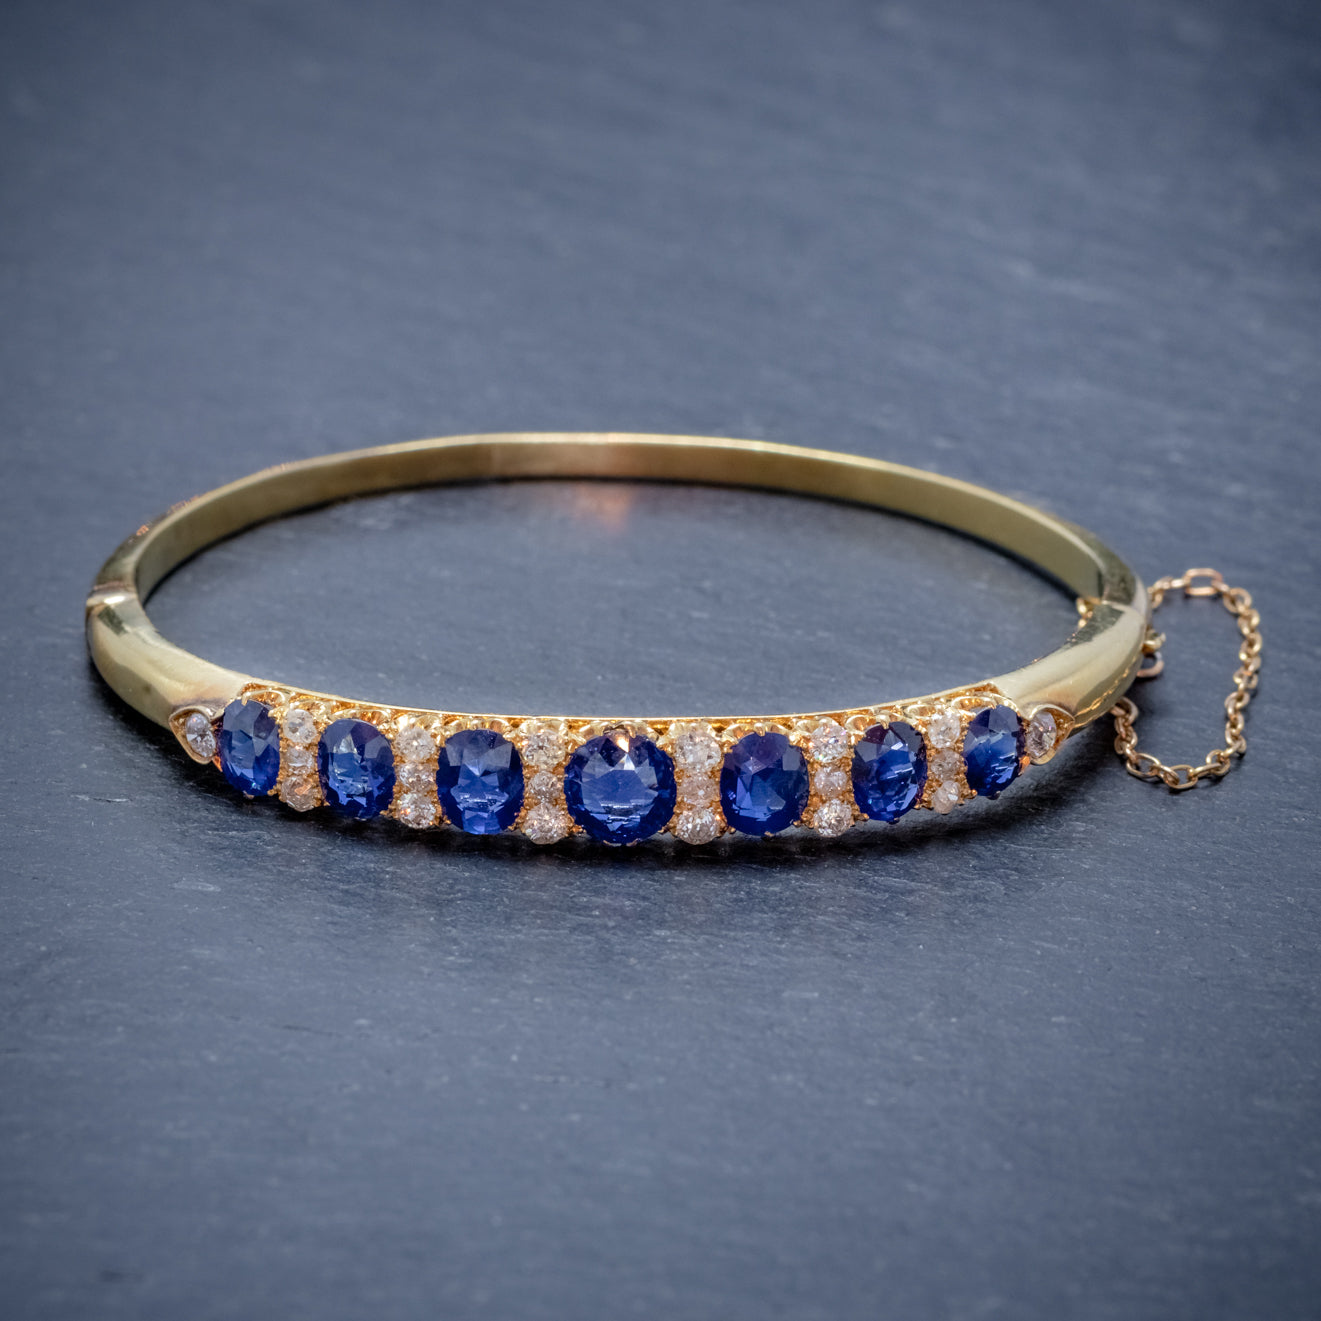 ANTIQUE VICTORIAN SAPPHIRE DIAMOND BANGLE 18CT GOLD 5.46CT OF NATURAL ...